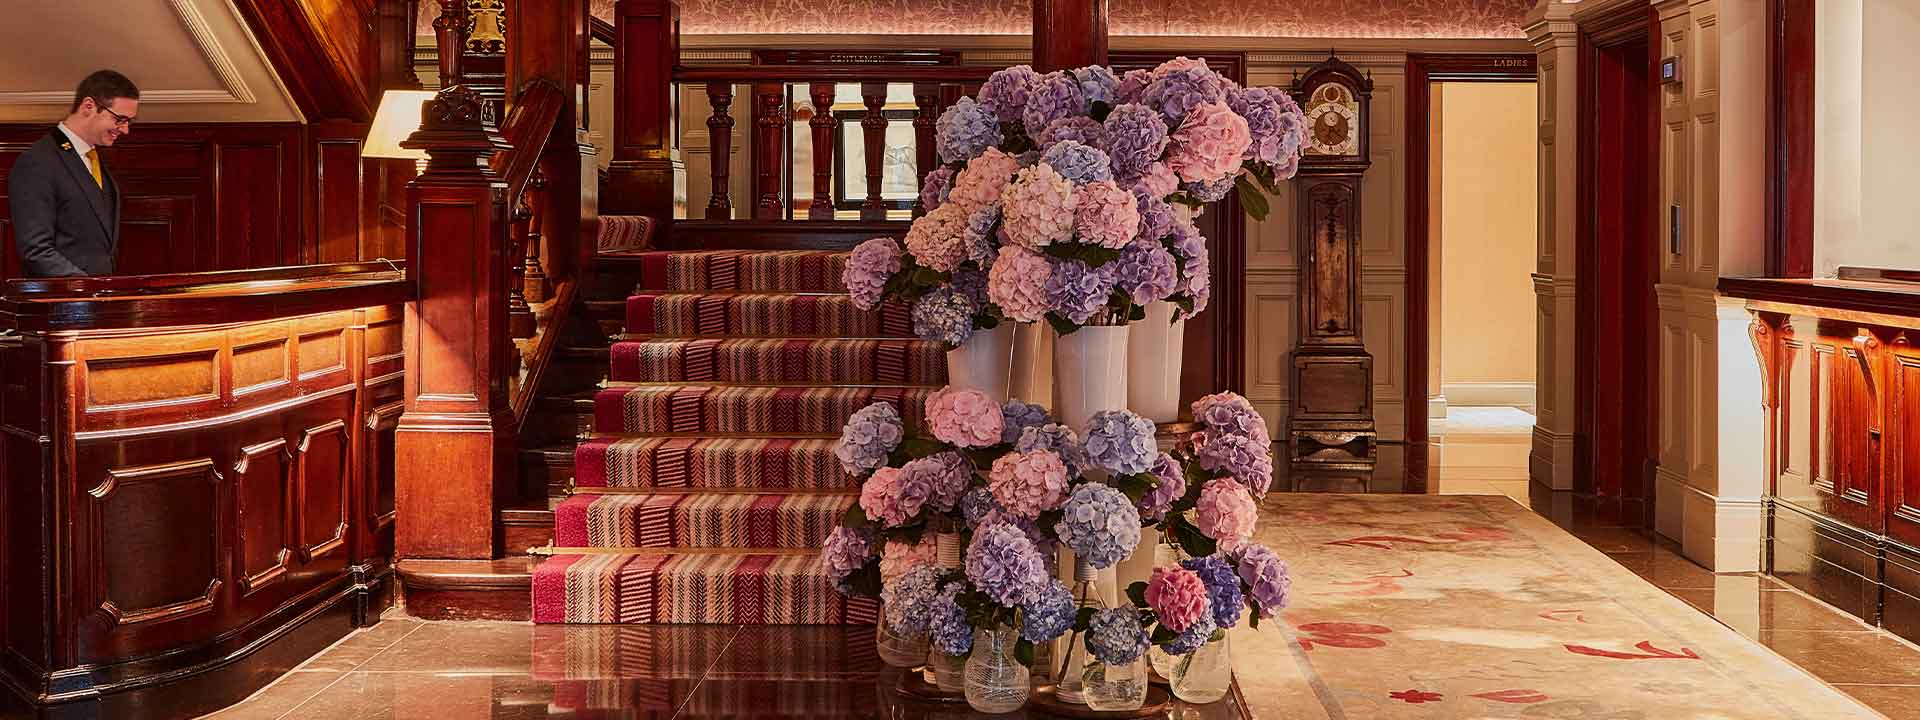 A hotel concierge is working smilingly at The Connaught, next to magnificent flower arrangements.